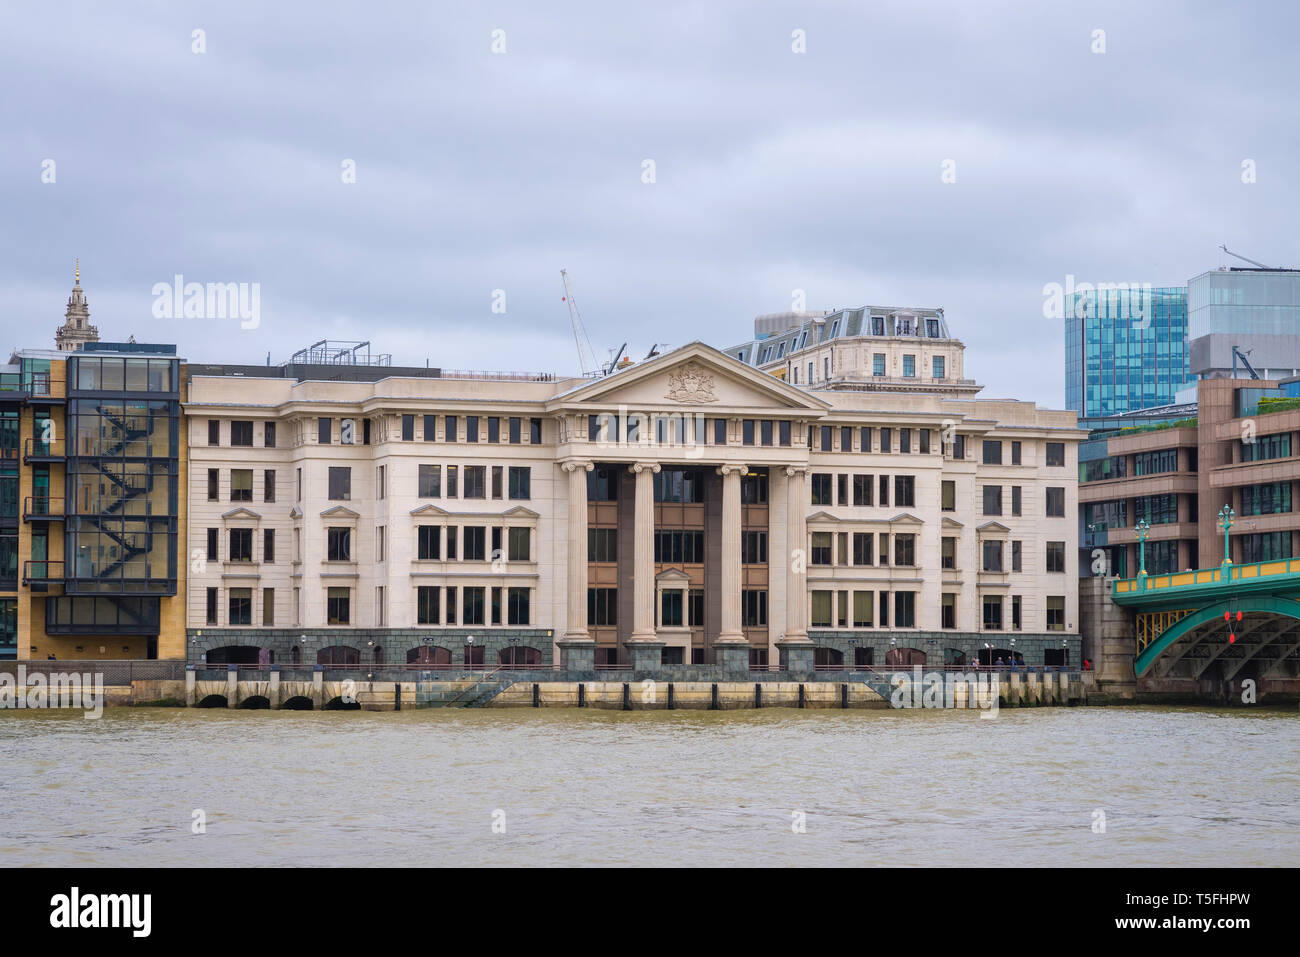 The Vintners' Hall by the River Thames in London, England Stock Photo